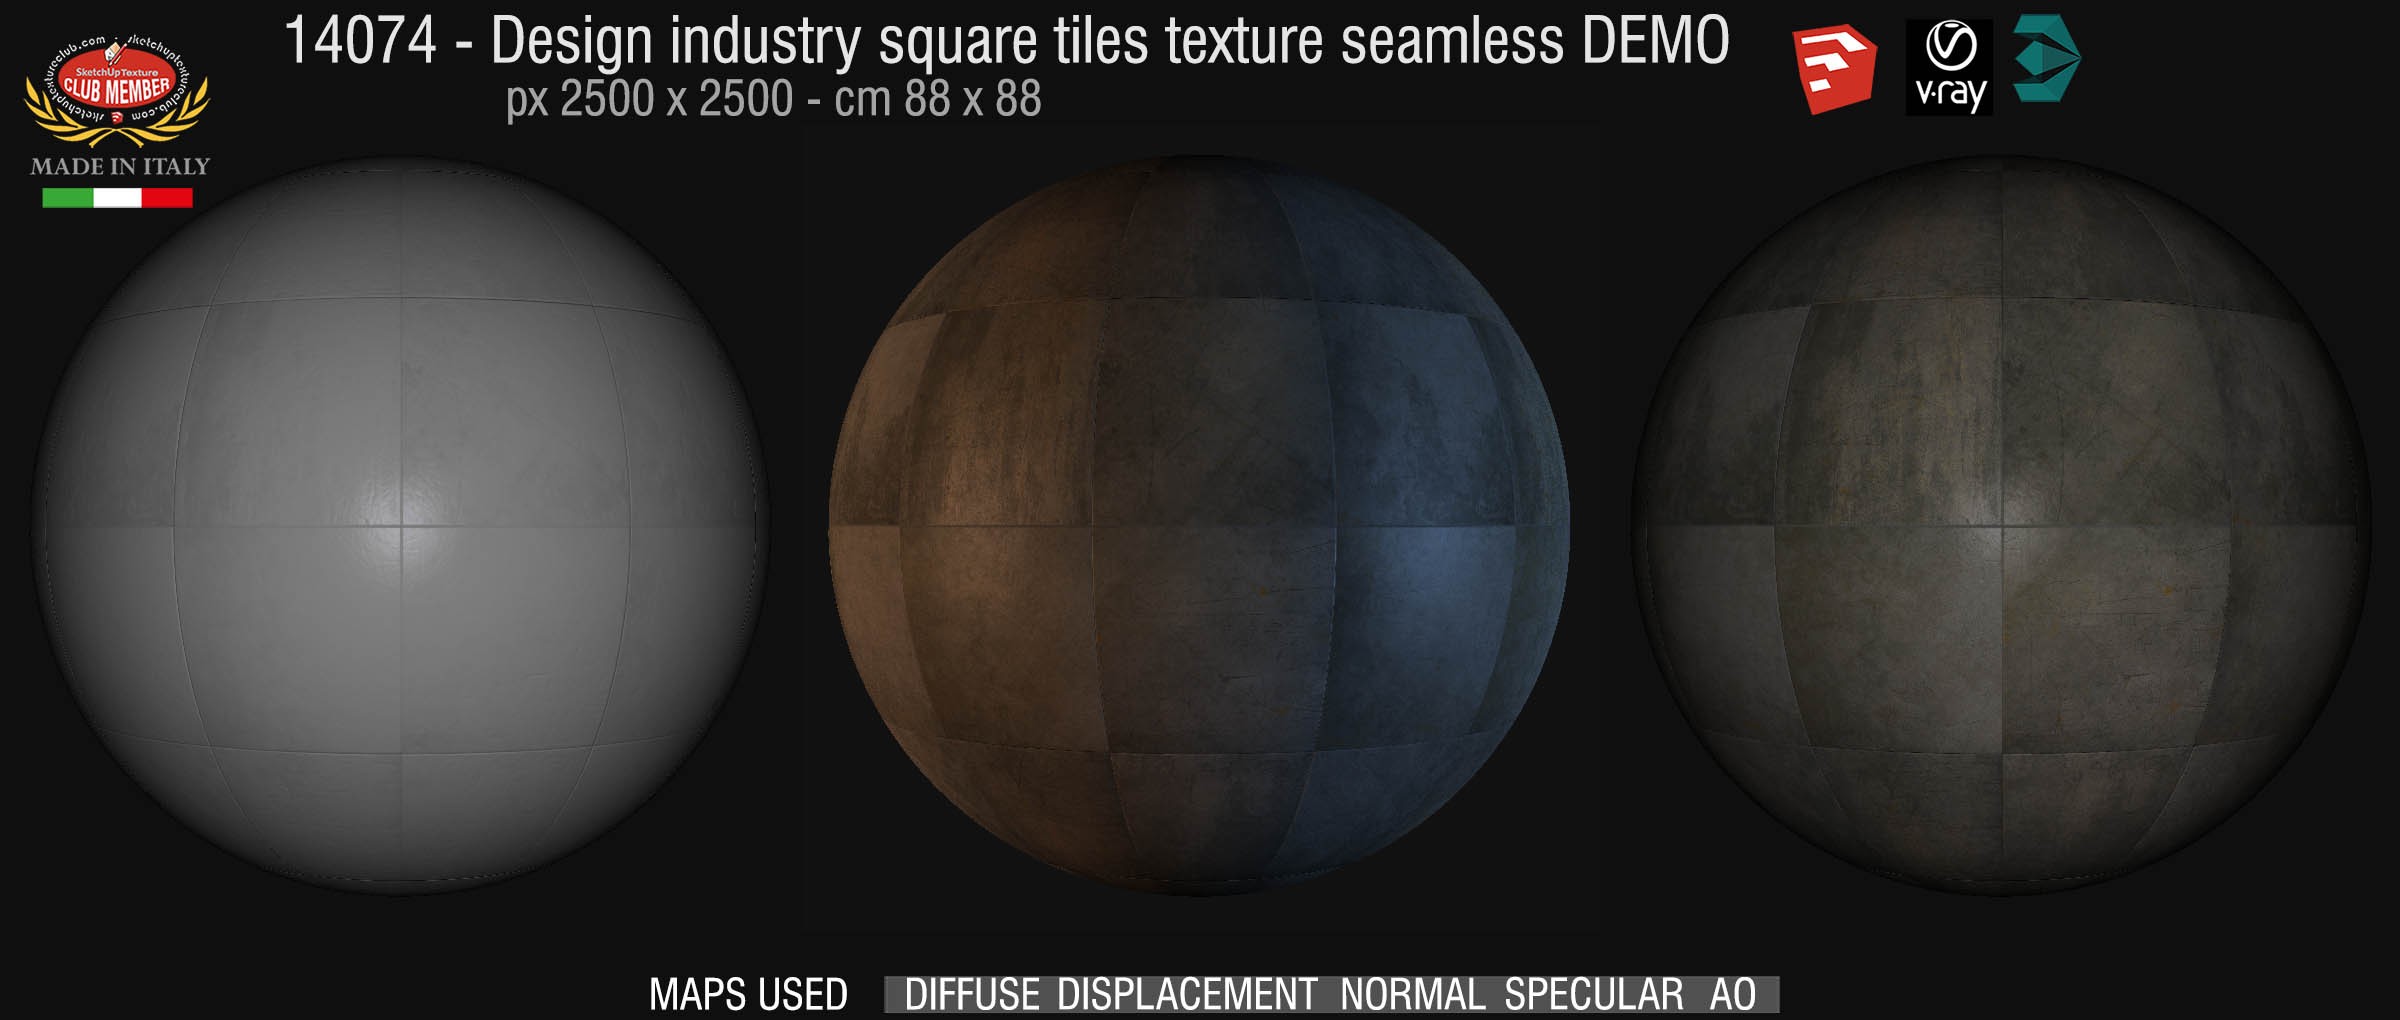 14074 Design industry square tile texture seamless + maps DEMO